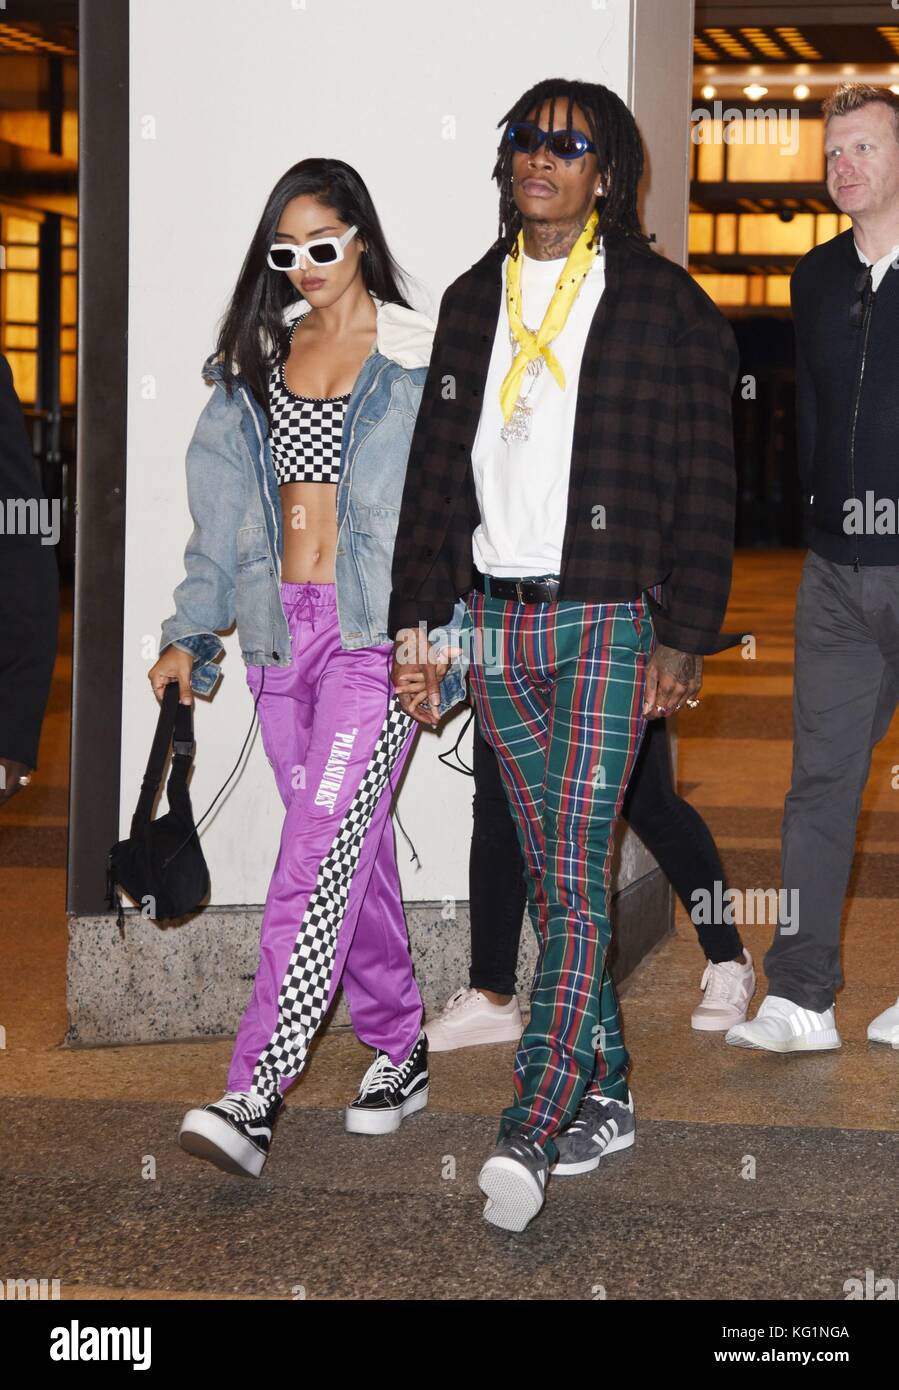 New York, NY, USA. 2nd Nov, 2017. Izabela Guedes, Wiz Khalifa, seen at MTV  TRL studios out and about for Celebrity Candids - THU, New York, NY  November 2, 2017. Credit: Derek